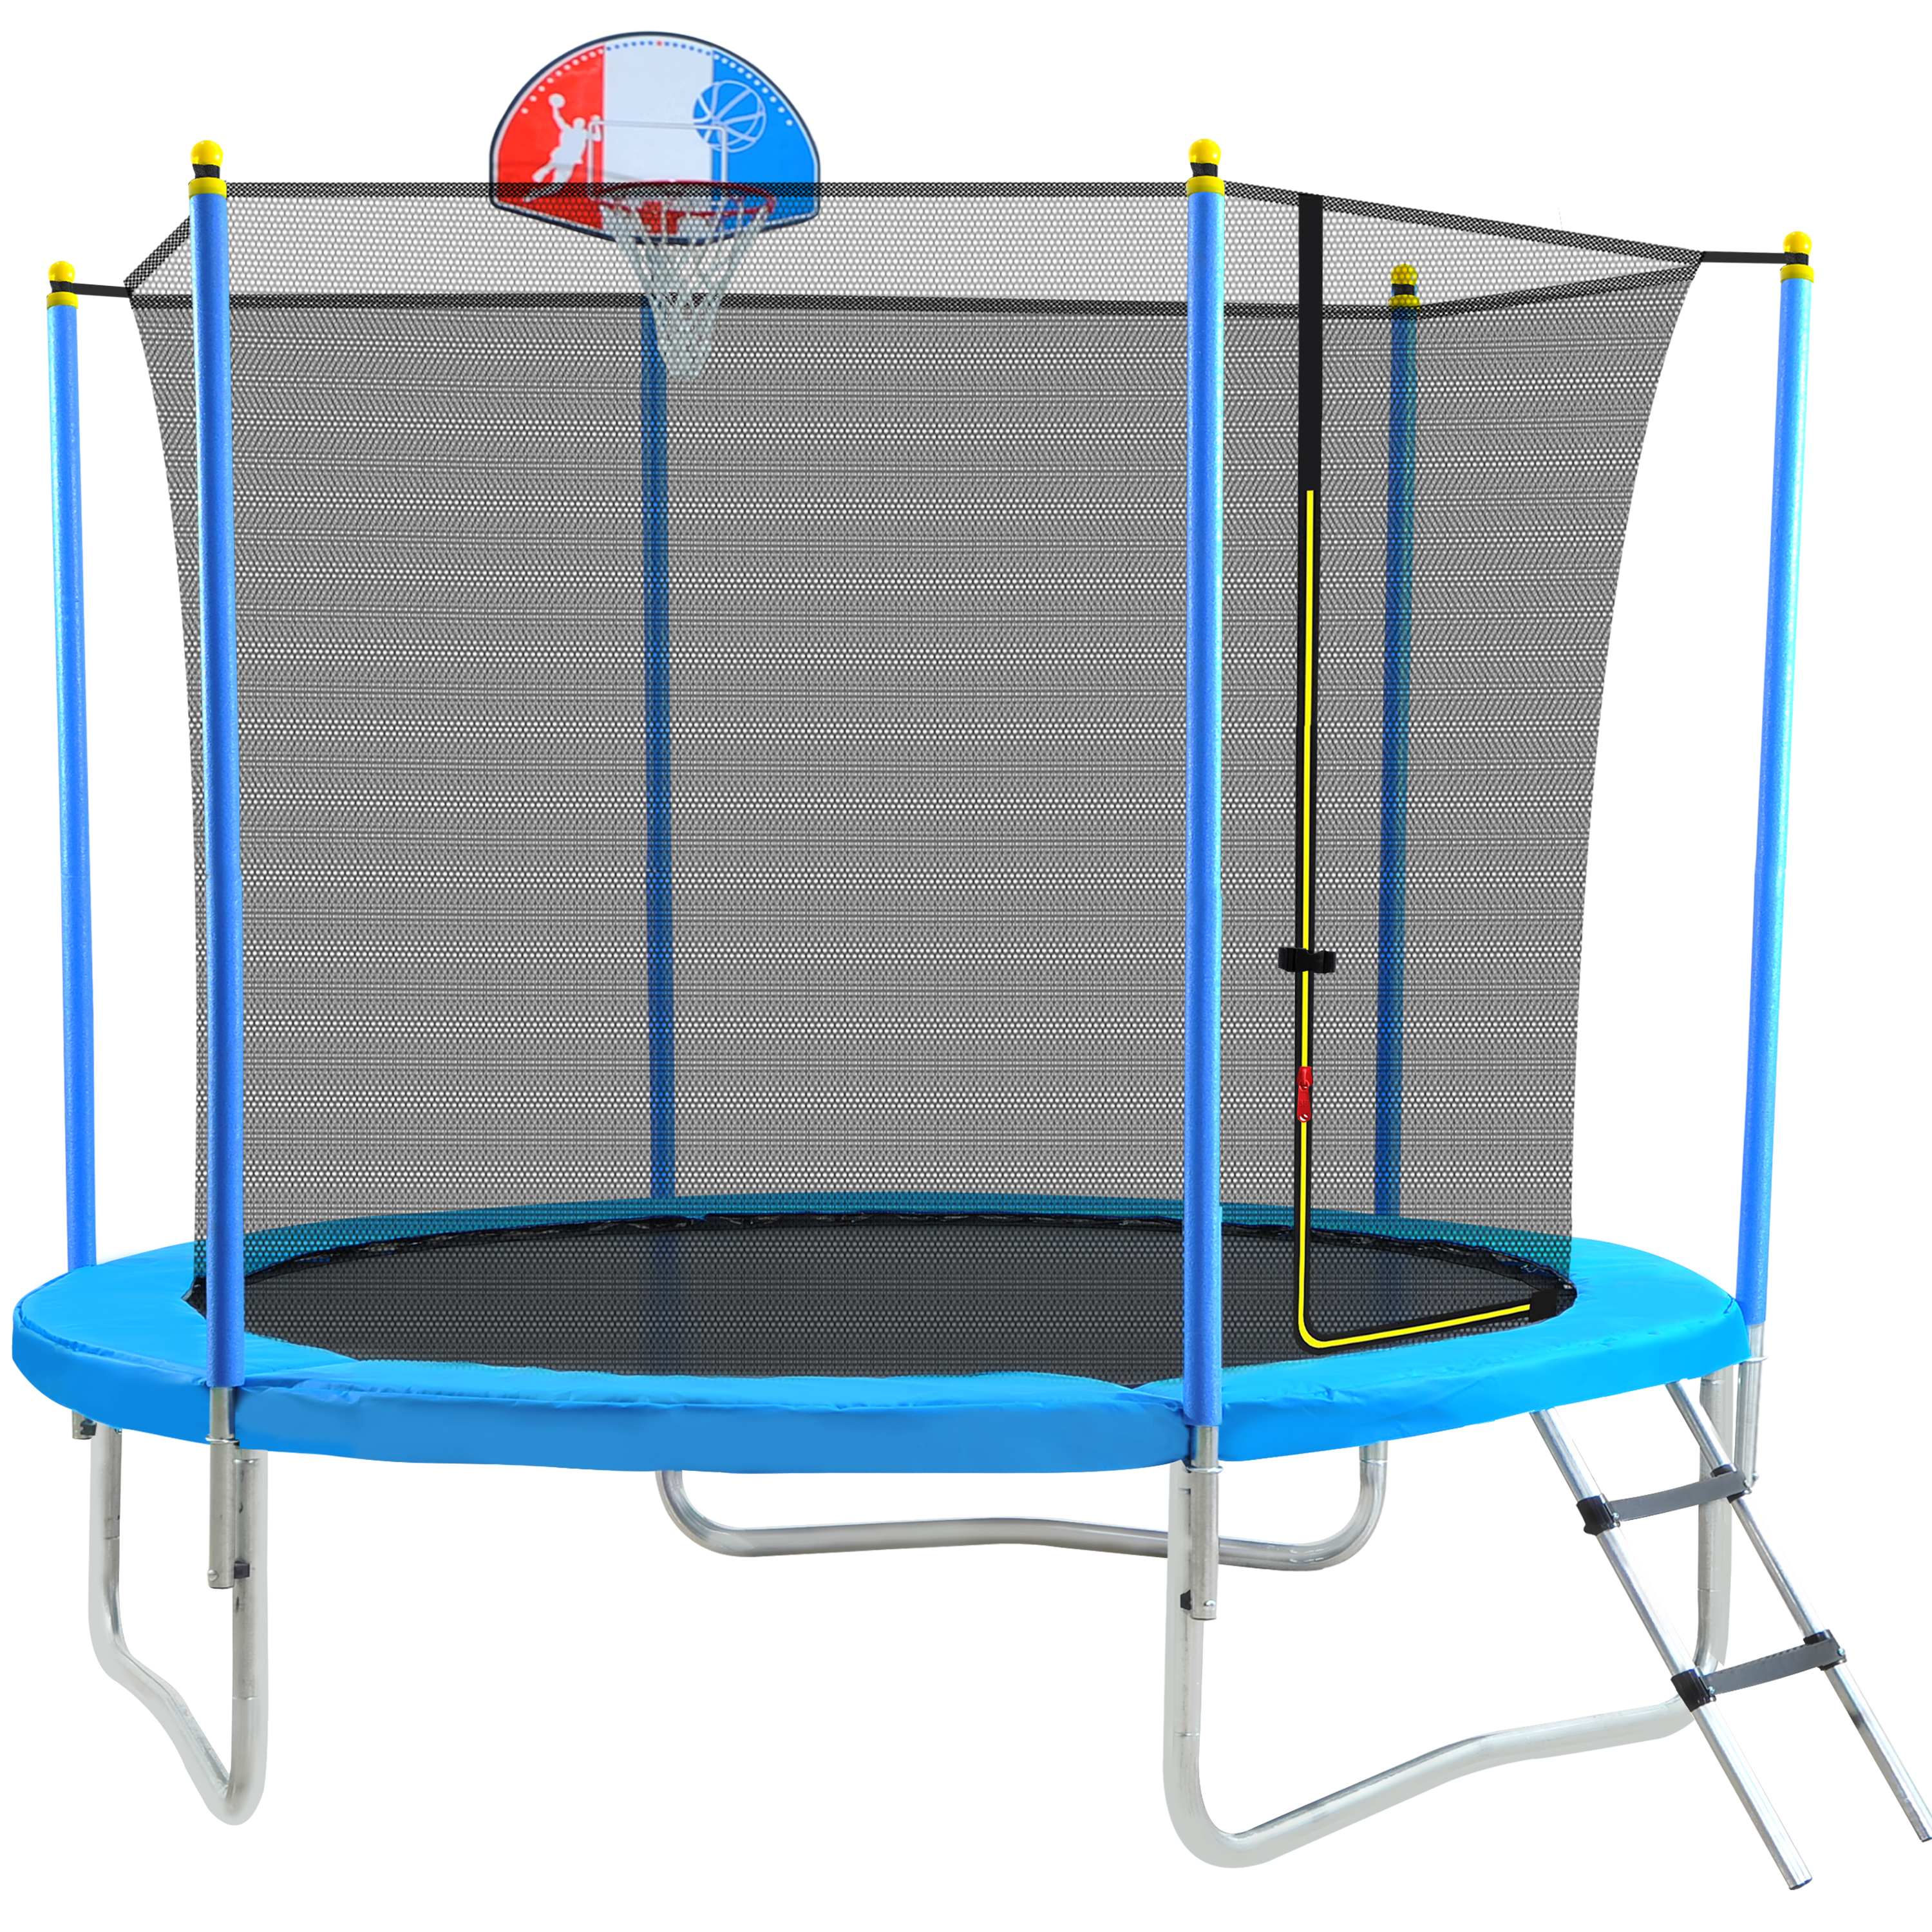 8FT Trampoline for Kids with Safety Enclosure Net, Basketball Hoop and Ladder, Easy Assembly Round Outdoor Recreational Trampoline-CASAINC